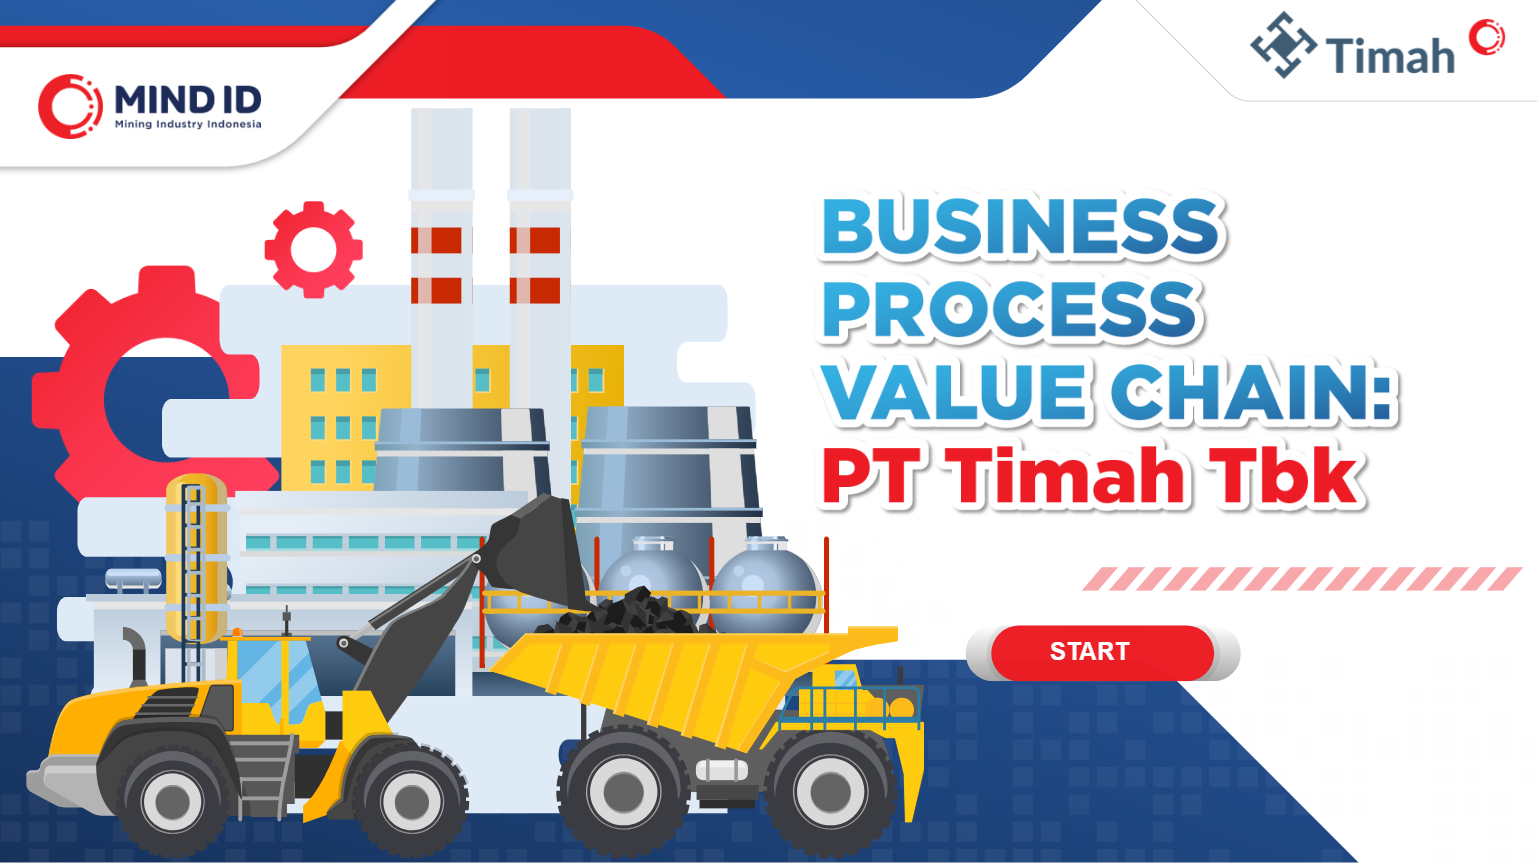 TIMAH Business Process Value Chain